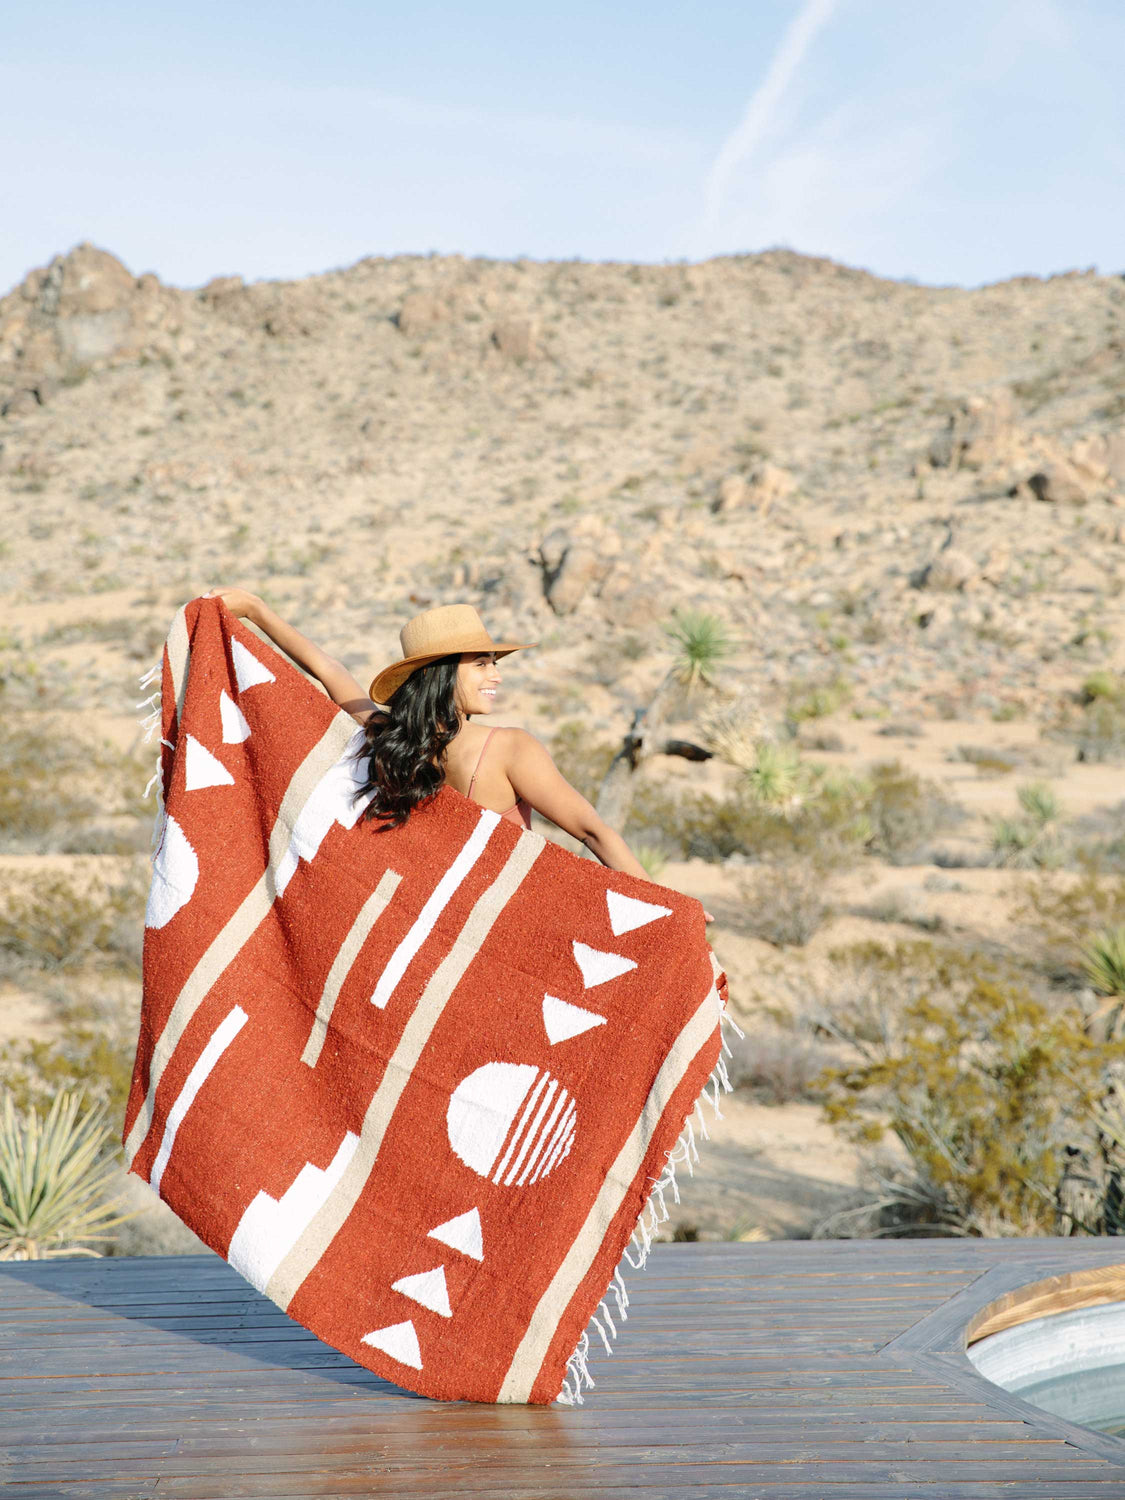 Woman in desert with red, tan, and white oversized Mexican blanket.